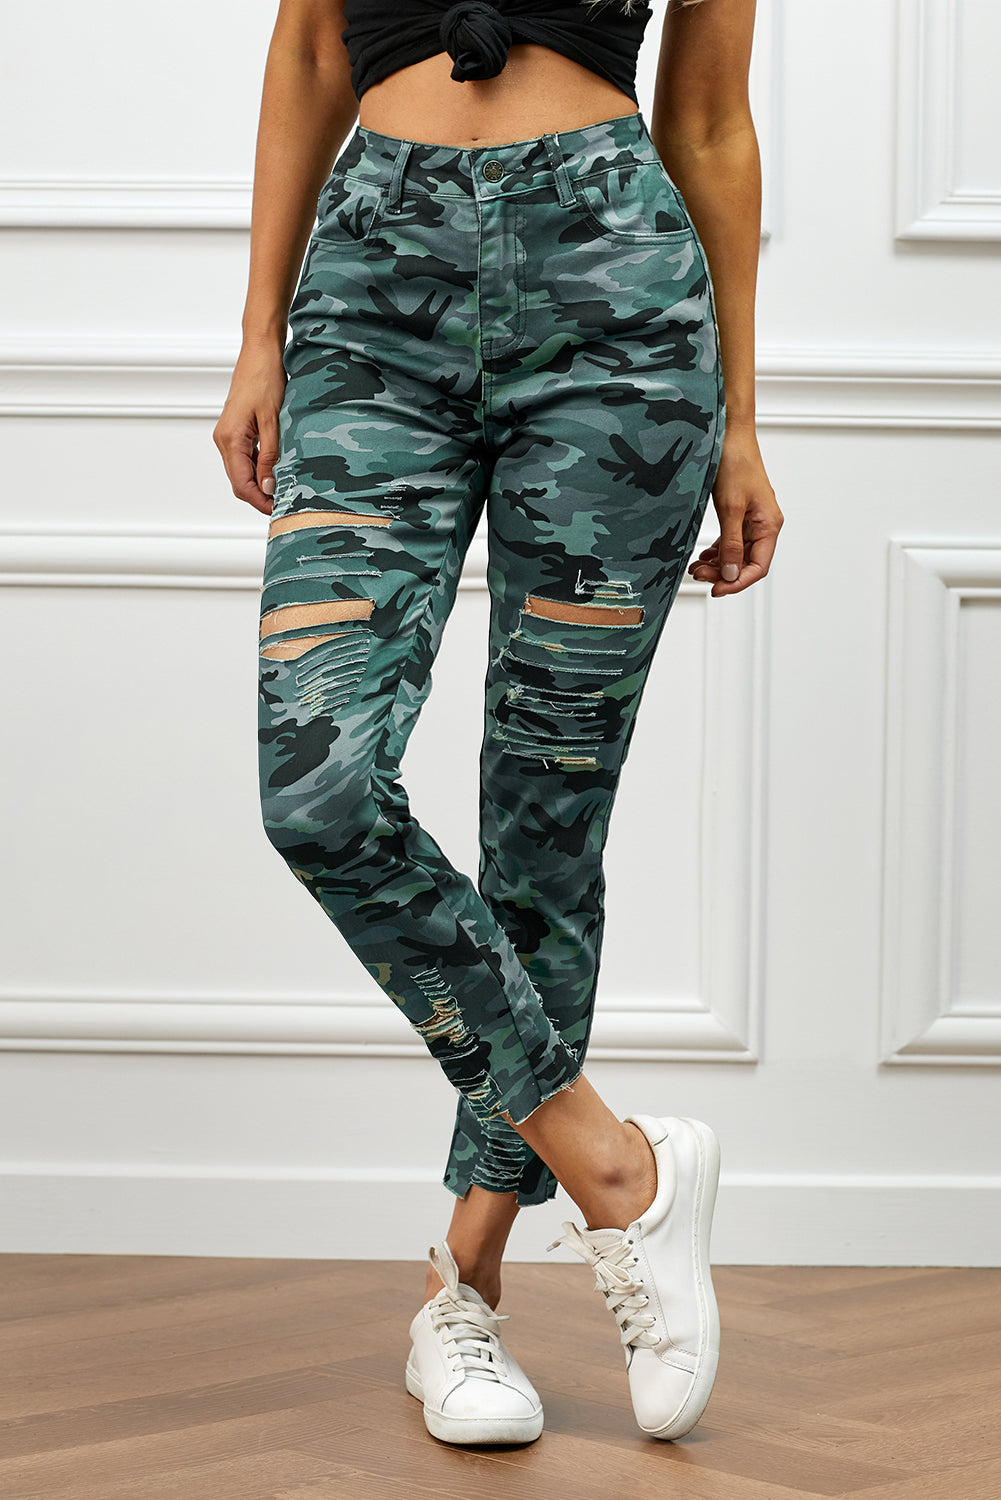 Distressed Camouflage Jeans – Anchor Blue Jeans